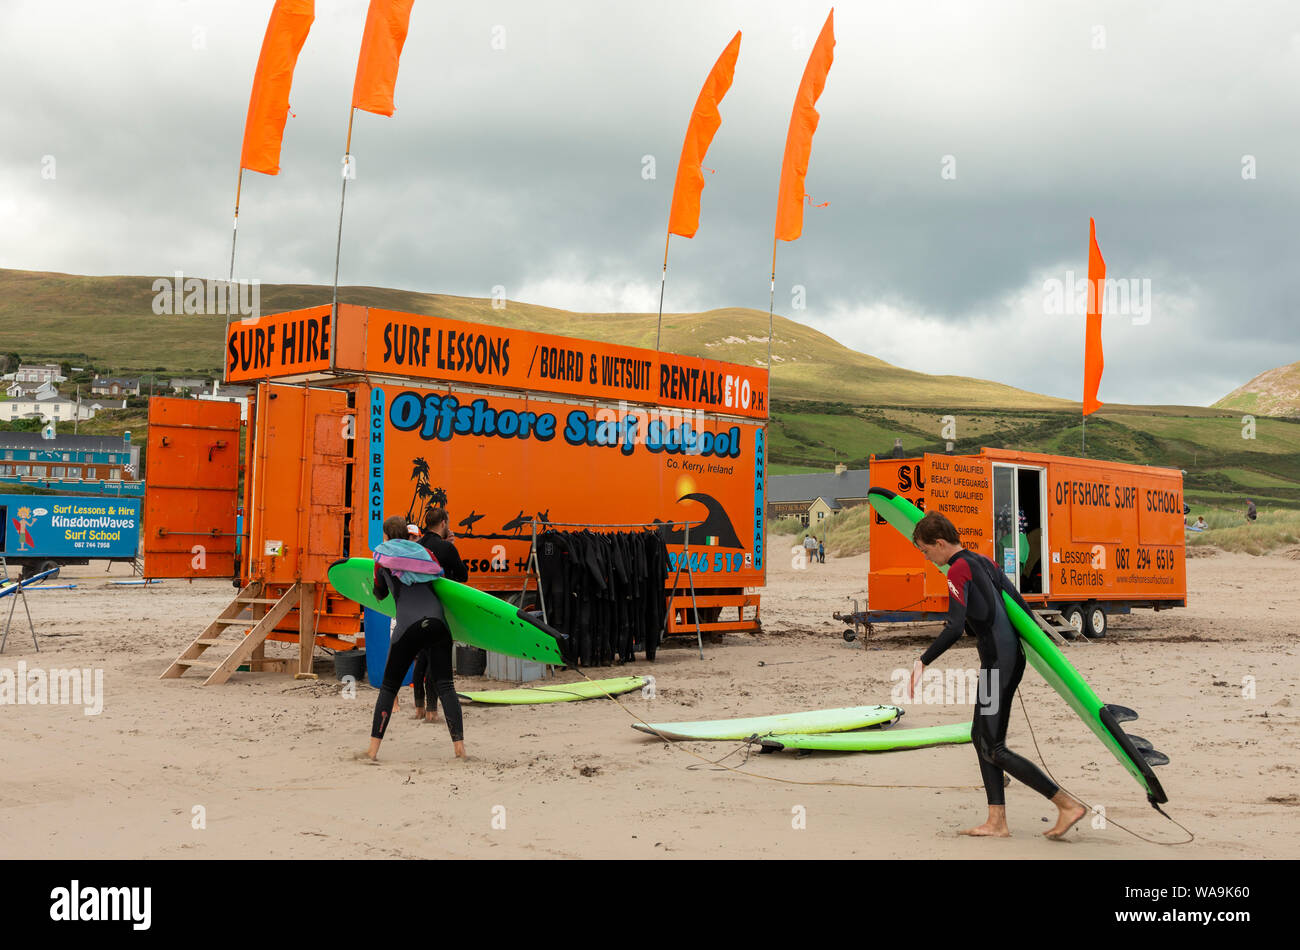 Young surfers at the Offshore Surf School surf hire orange cabin as surfing in Ireland concept at Inch Beach, County Kerry, Ireland Stock Photo